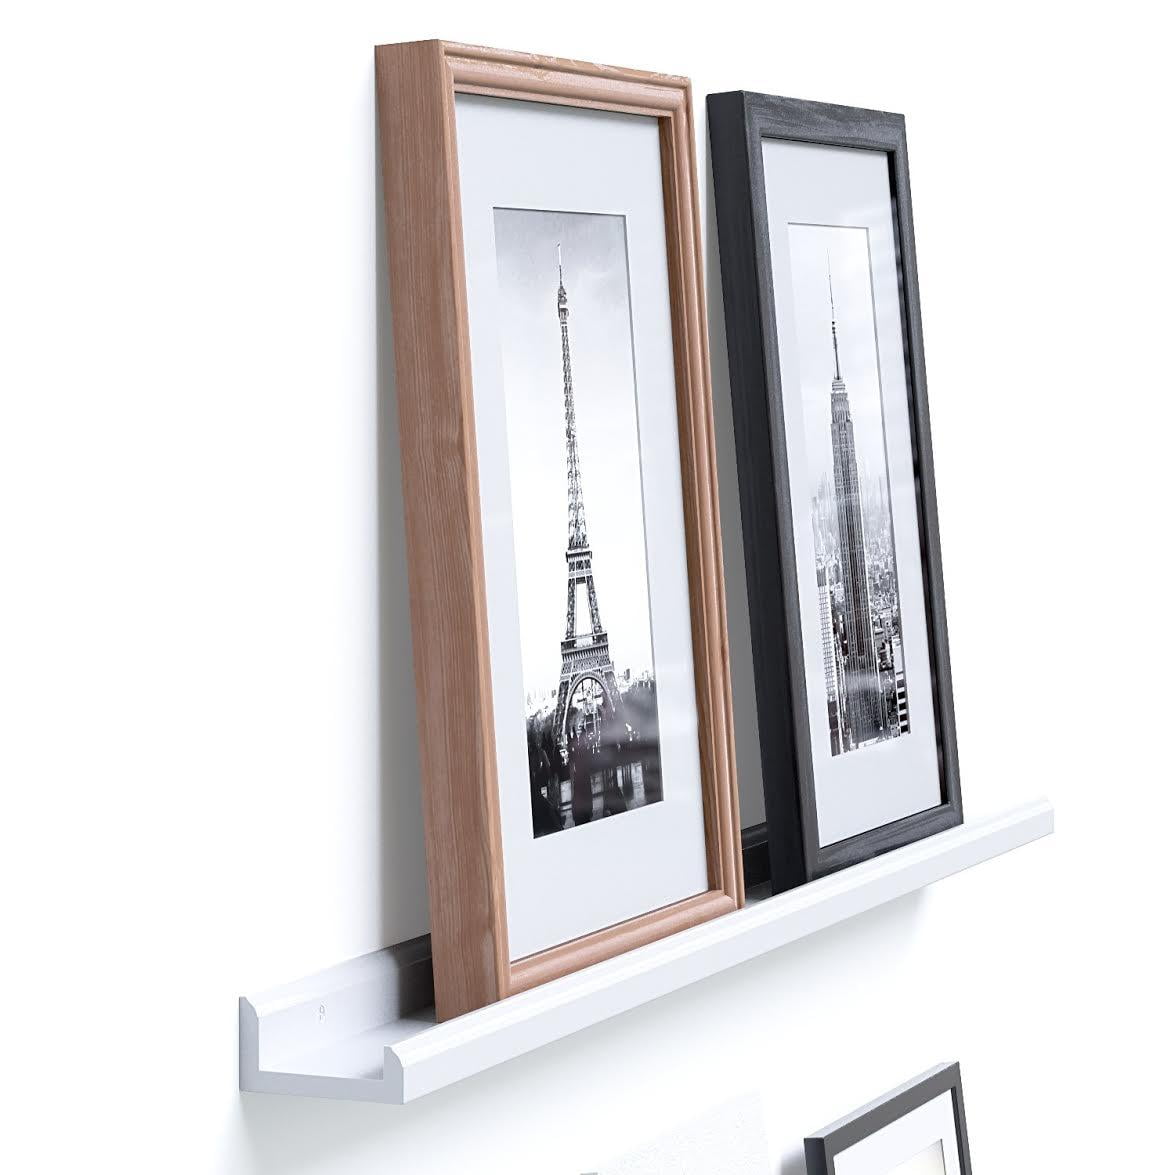 WALLNITURE Contemporary Floating Wall Shelf Ledge for Picture Frames Book 46 